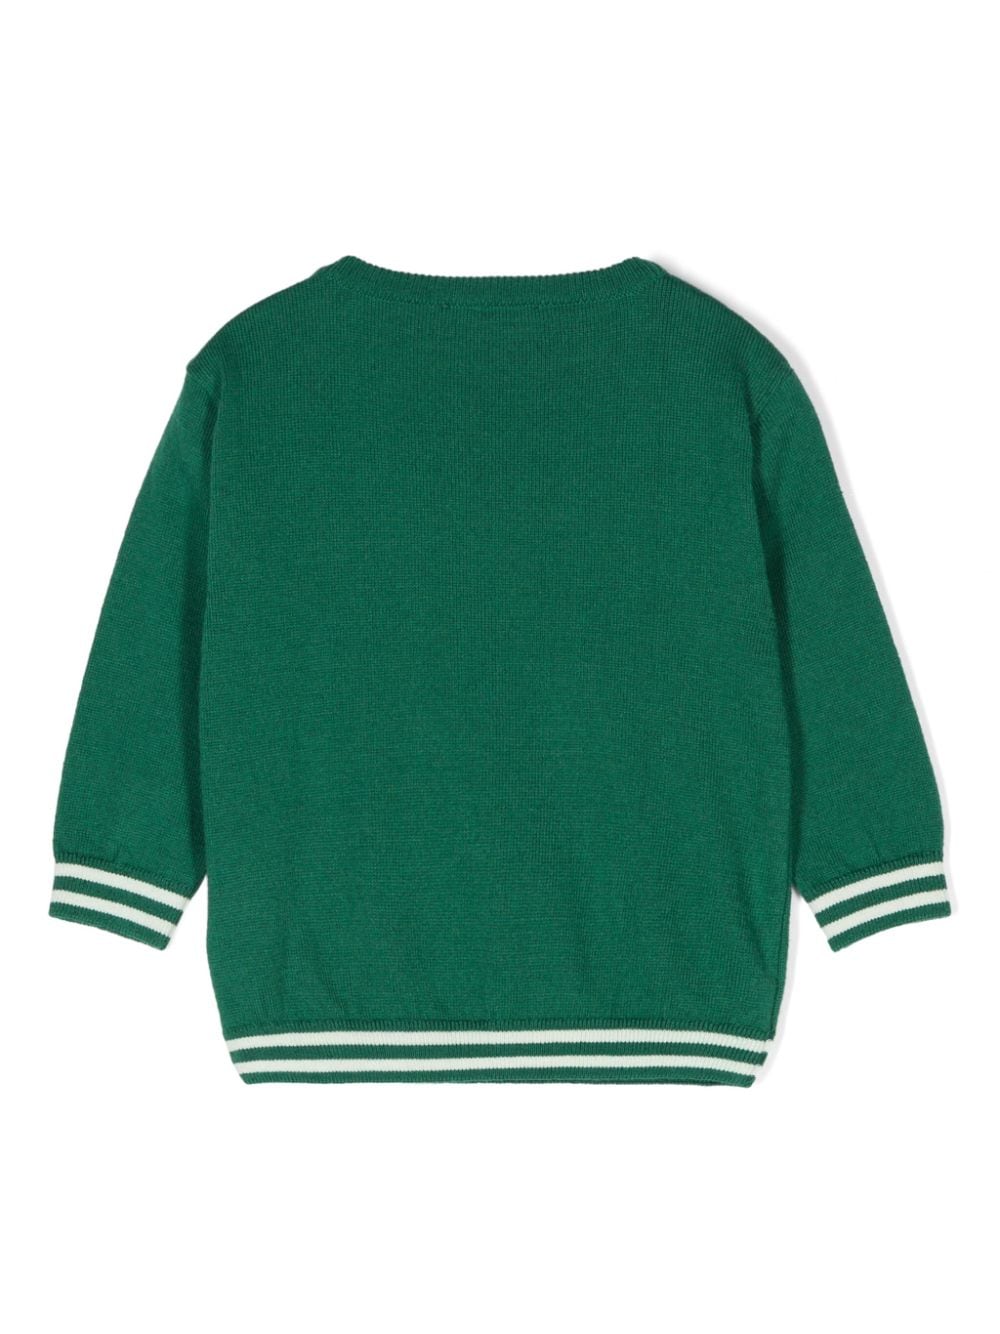 Baby sweater in green cotton and wool blend